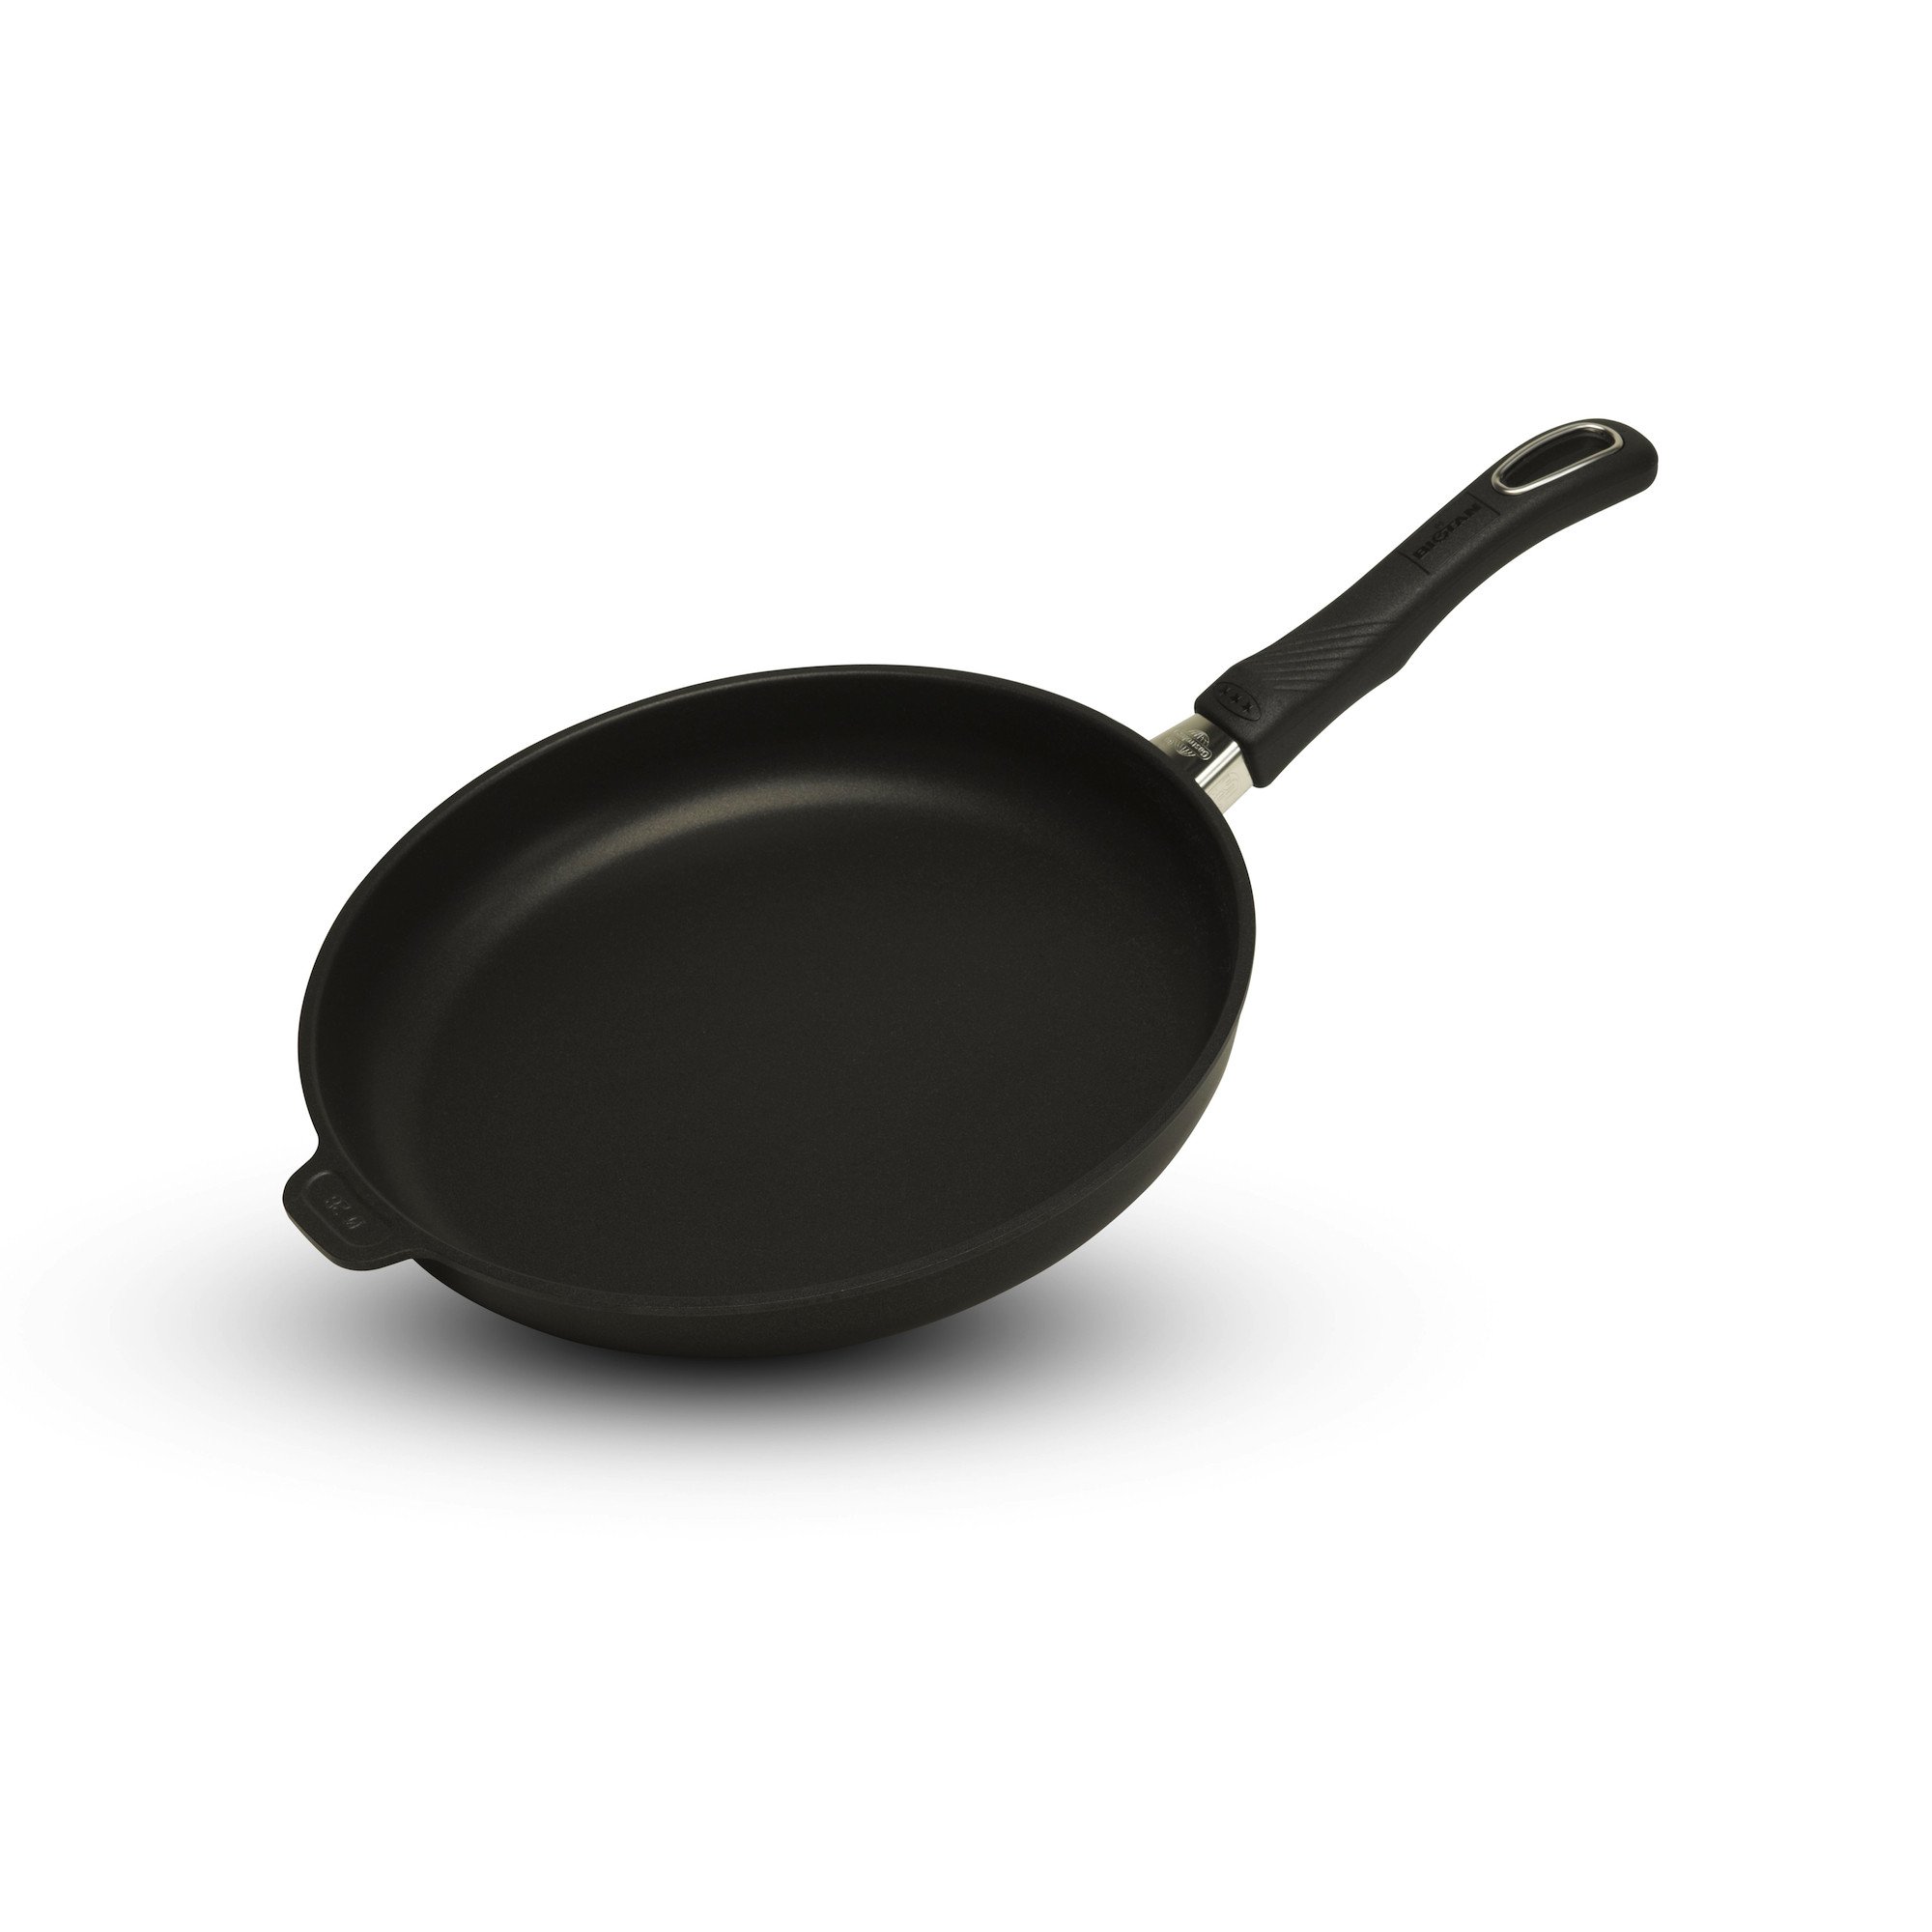 Gastrolux Cookware Non-Stick Frying Pan - Gastrolux Cookware | Best ...